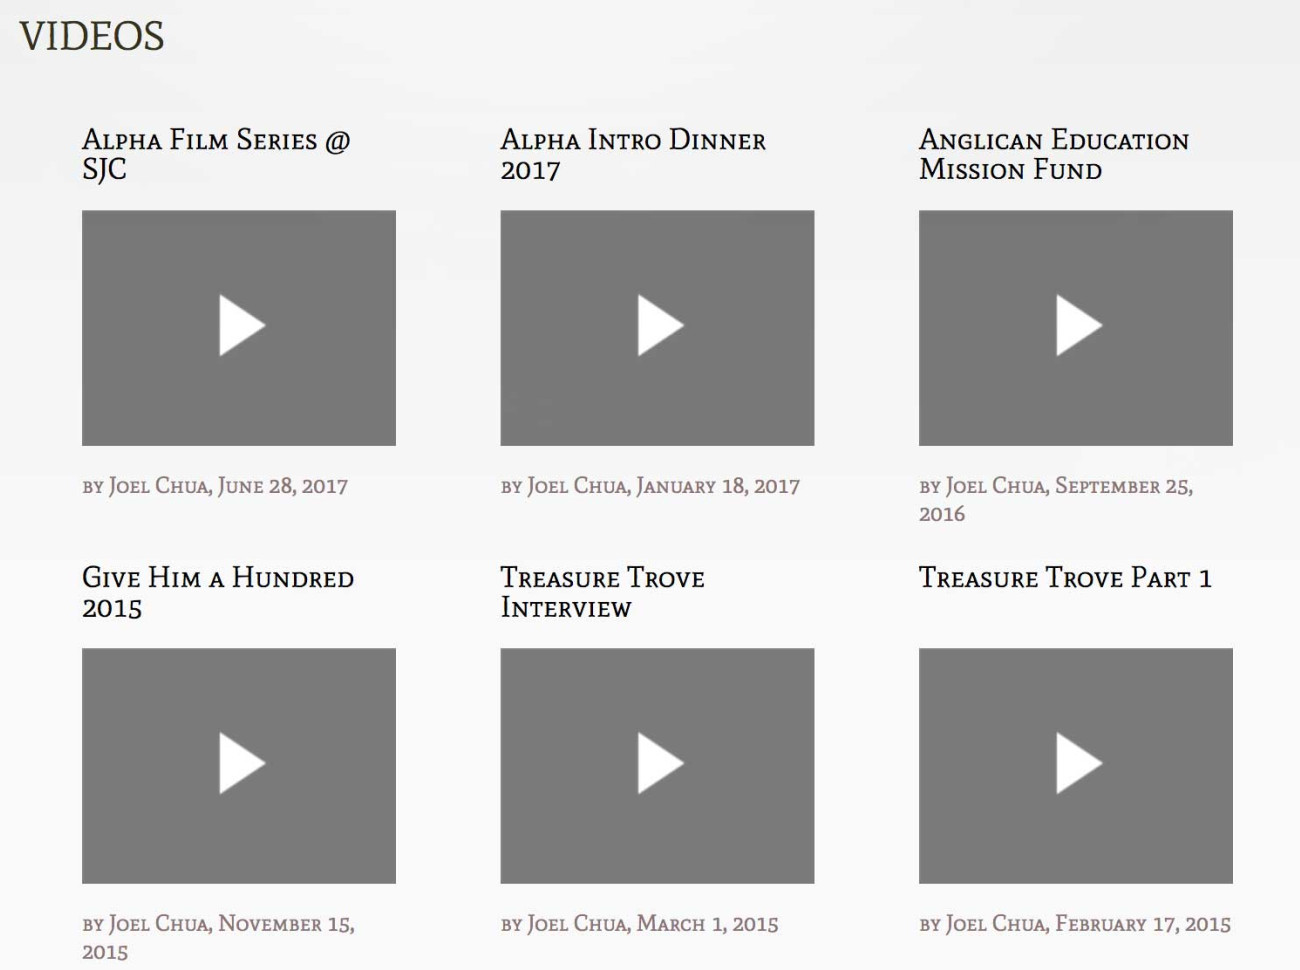 Screenshot of St. James' Church website video listings page